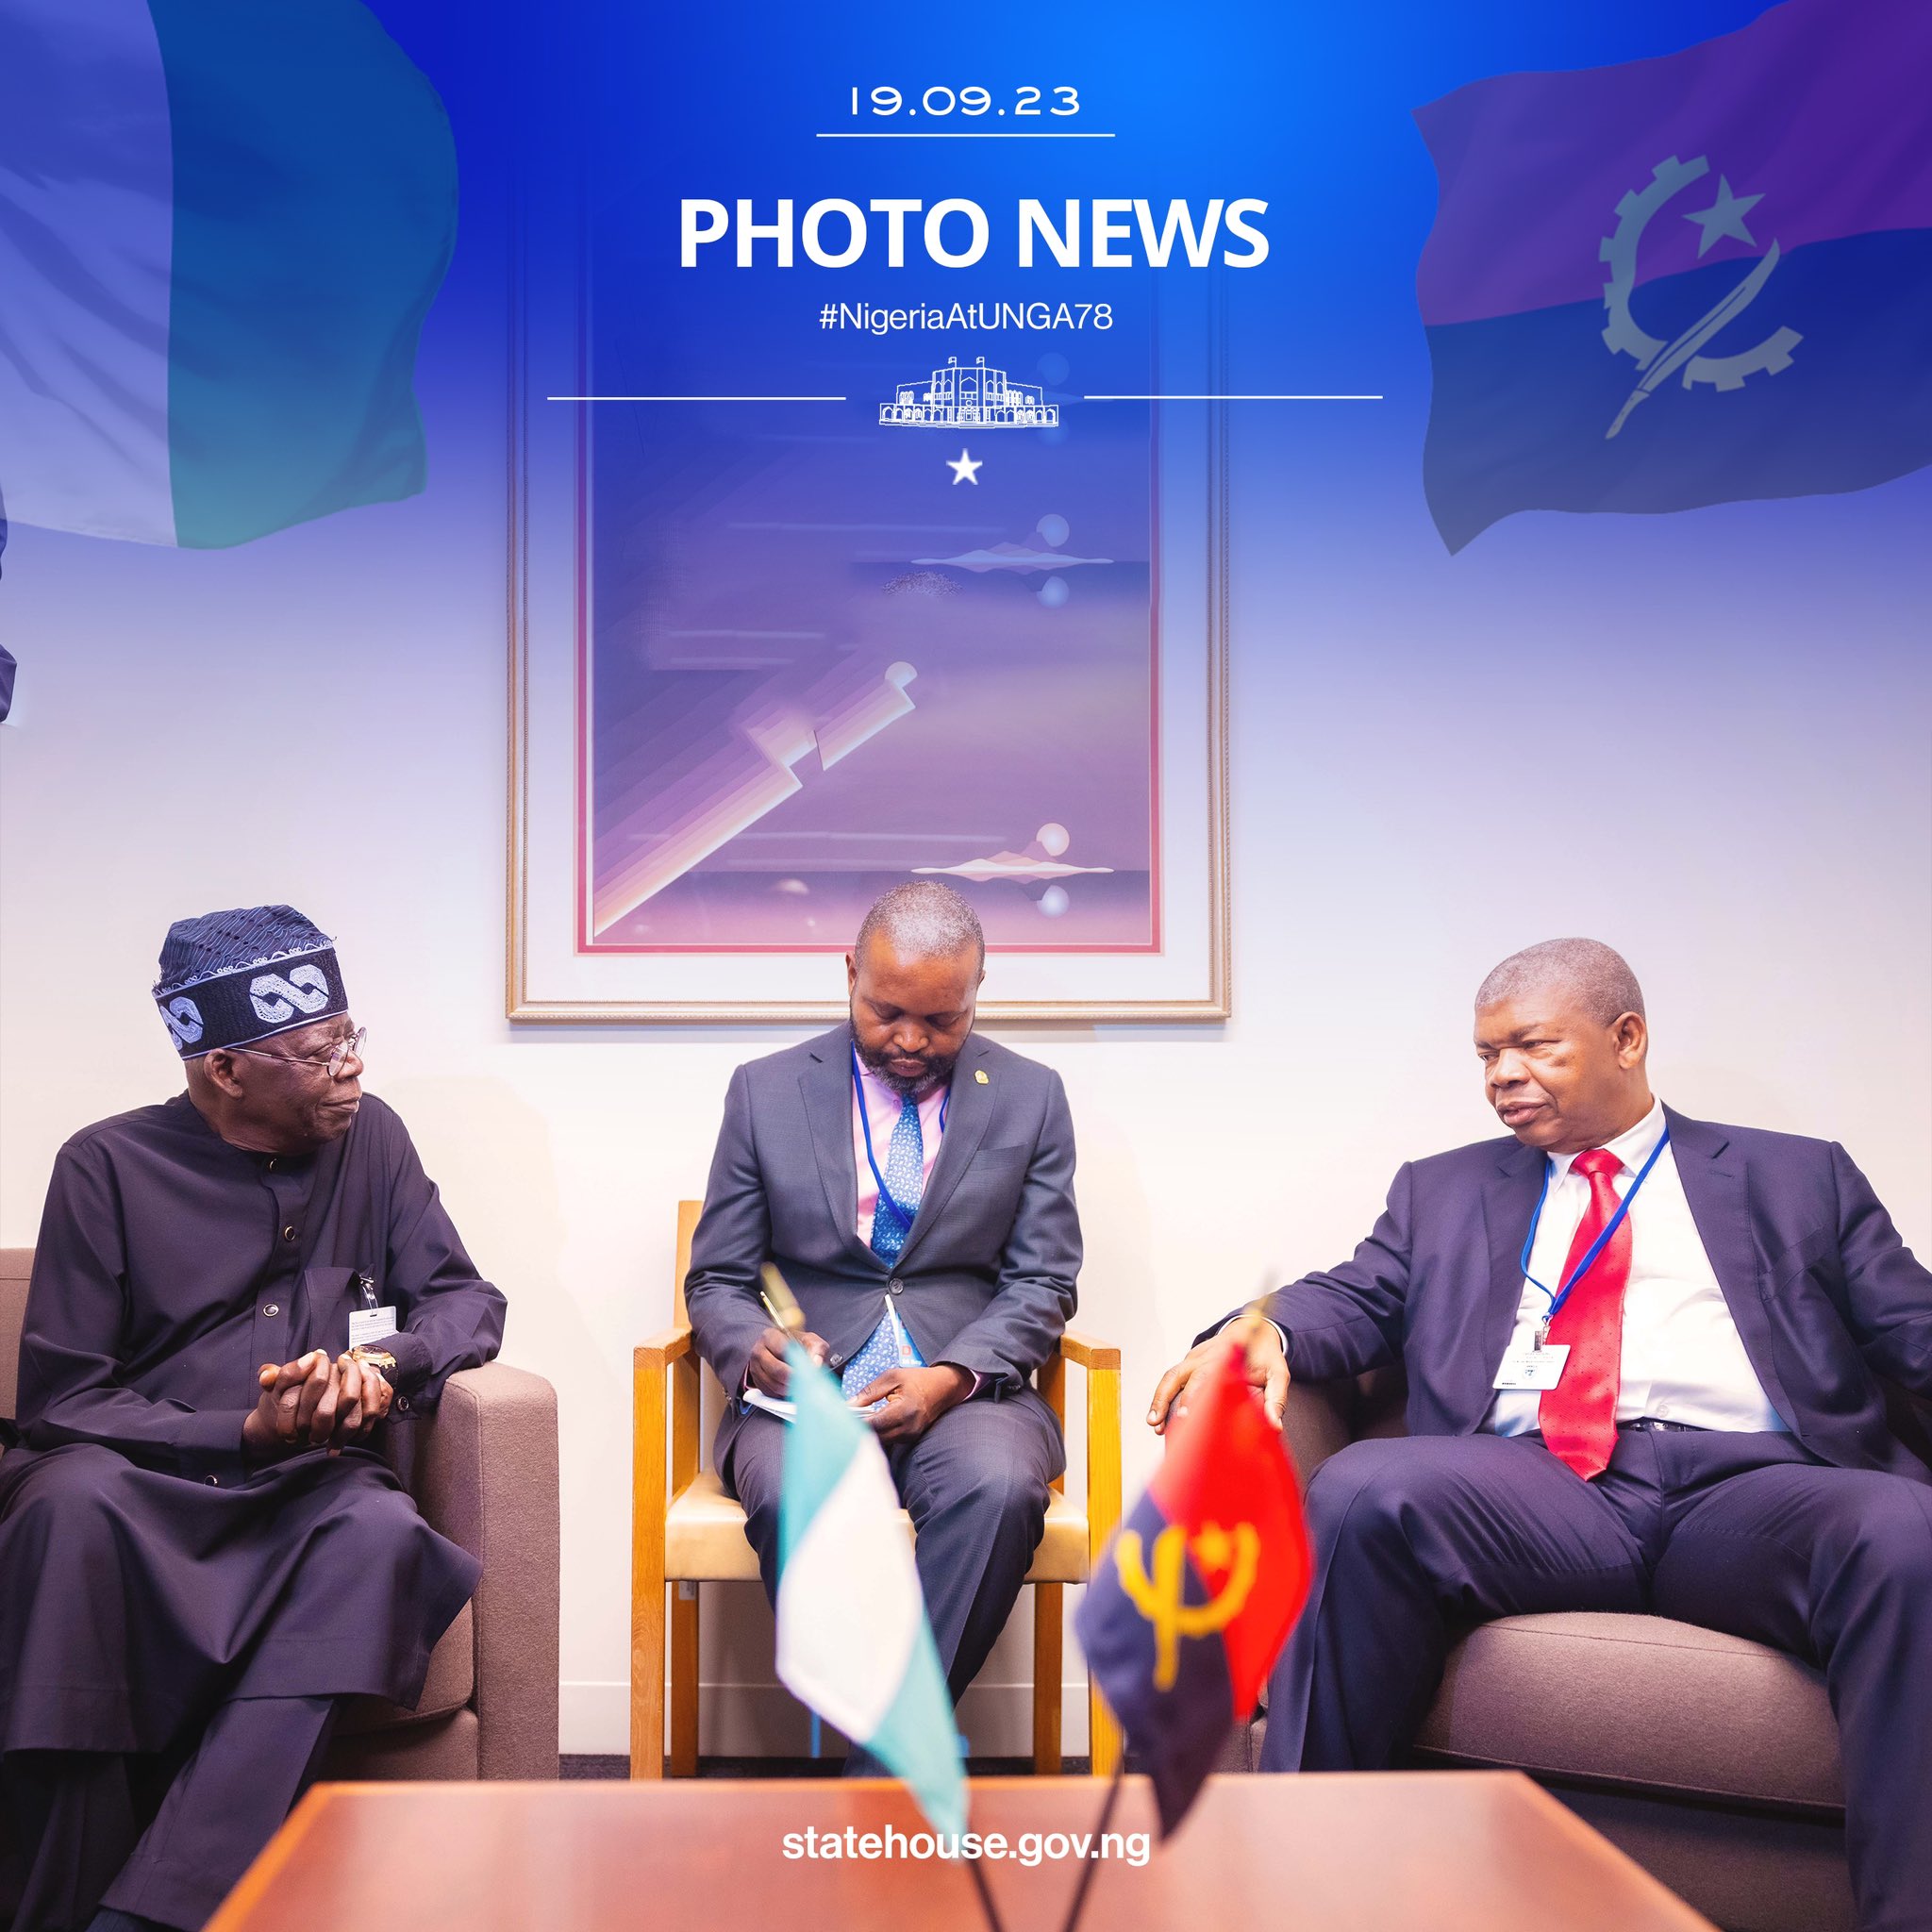 President Bola Tinubu @officialABAT in a Bilateral Meeting With João Manuel, President of Angola on the Sidelines of the Ongoing United Nations 78th General Assembly #PBATatUNGA78 #NigeriaAtUNGA78 #UNGA78 #UNGA